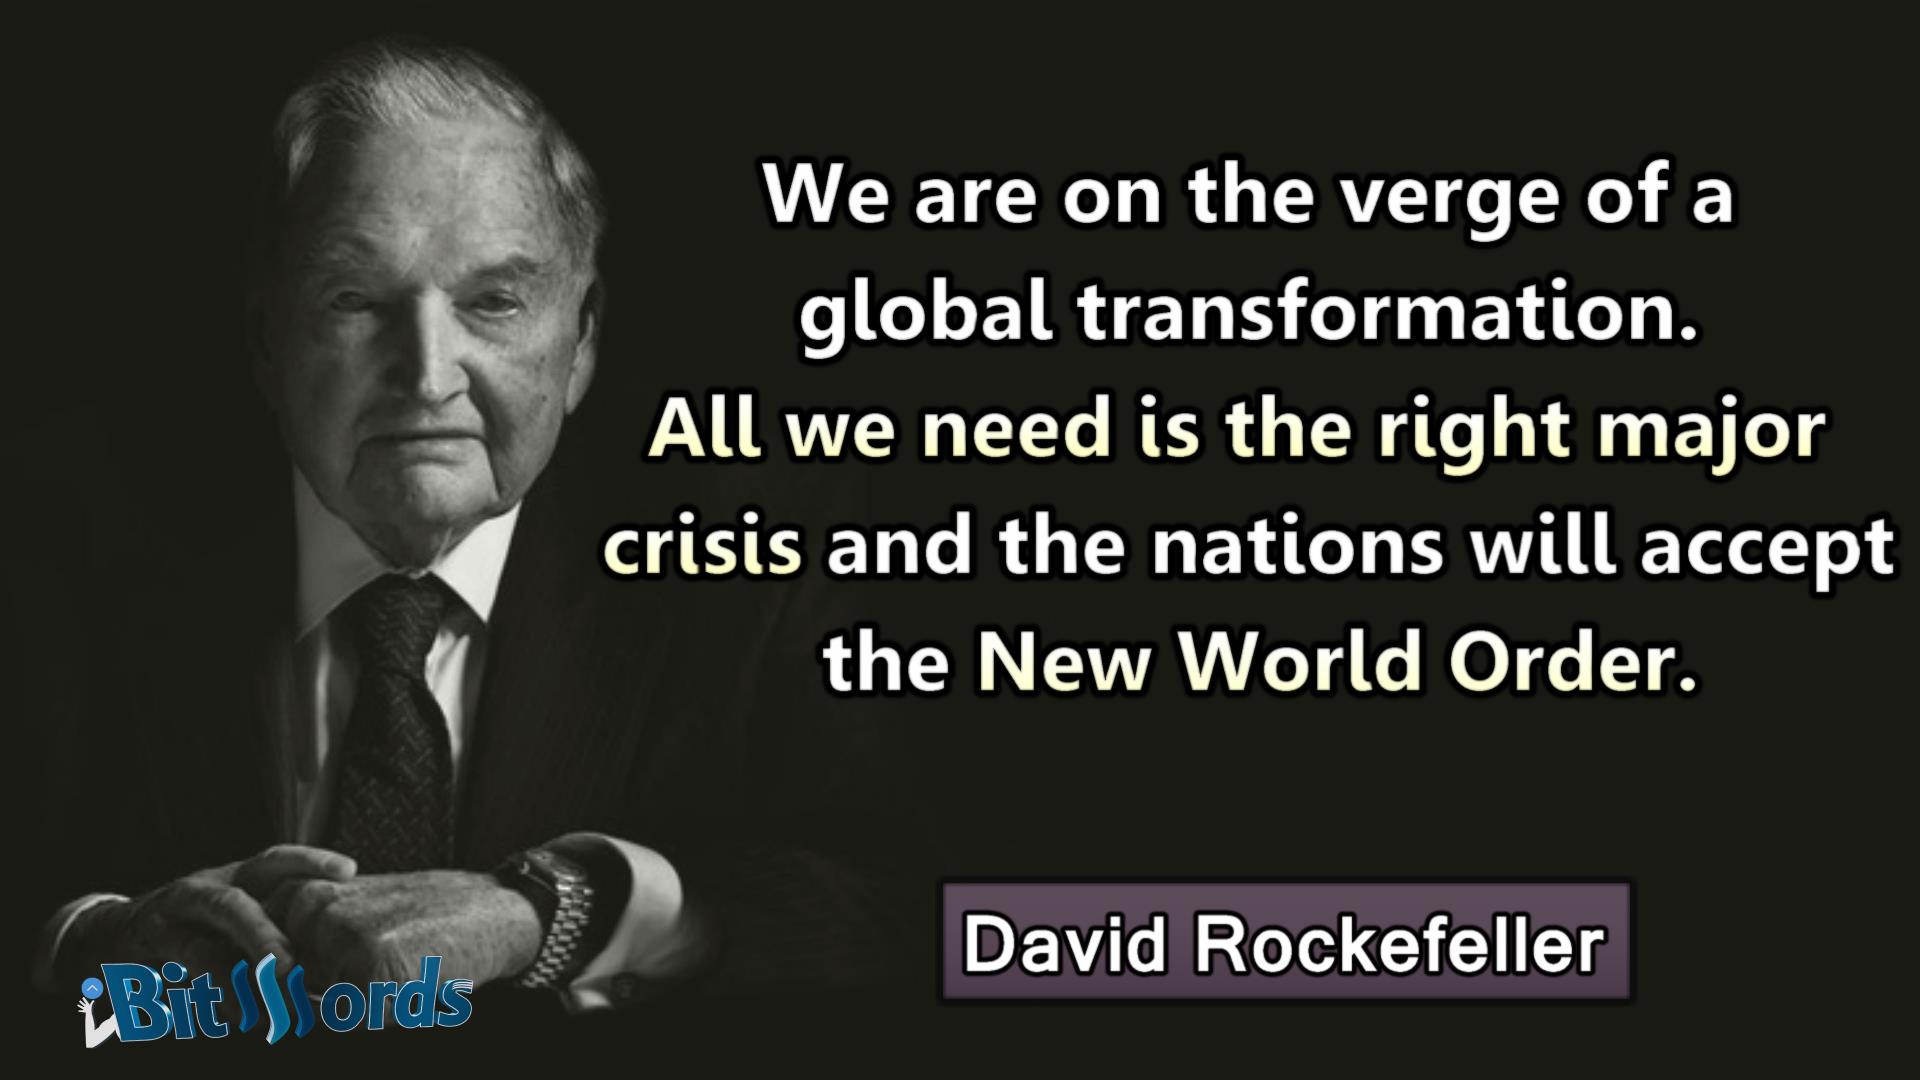 bitwords steemit quote of the day David Rockefeller we are on the verge of a global transformation all wee need is the right major crisis and the antion will accept the new world order.jpg